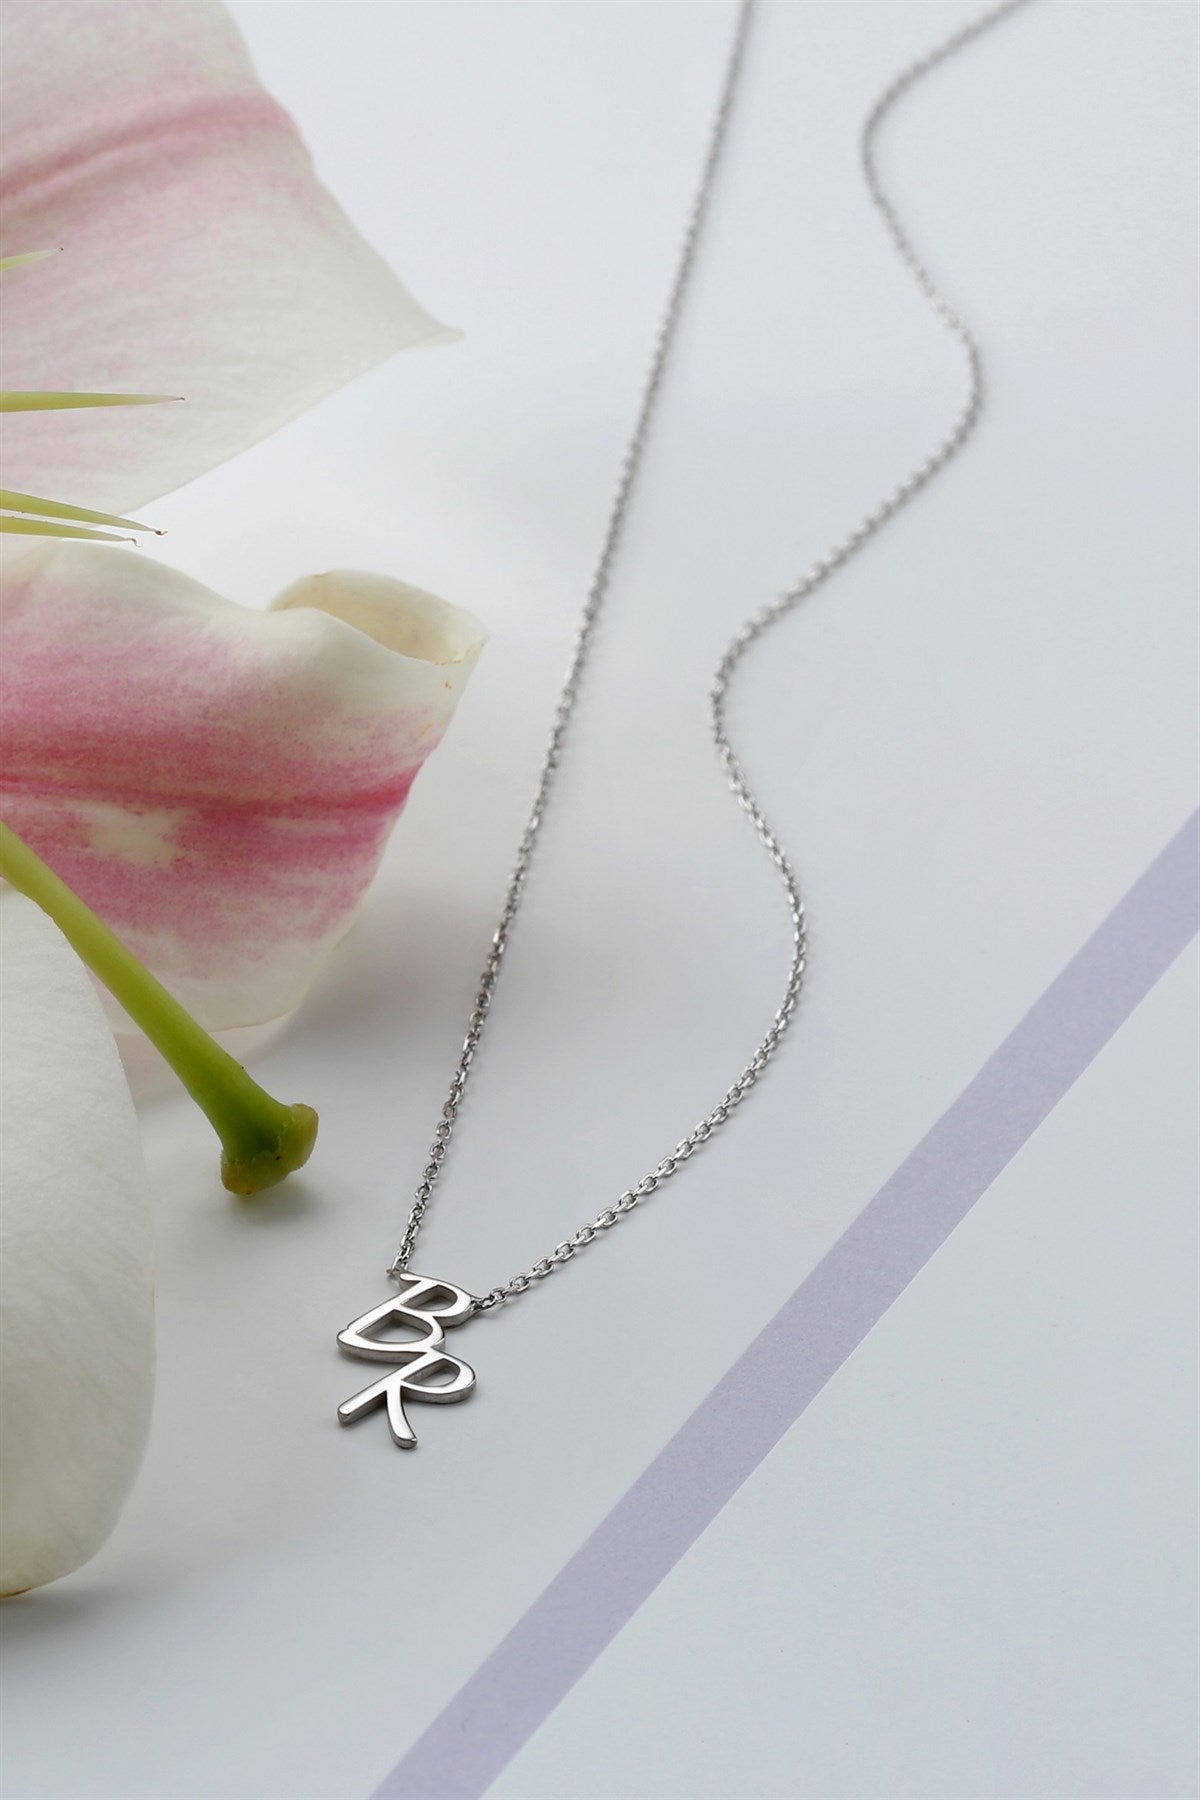 Silver Double Initial Necklace